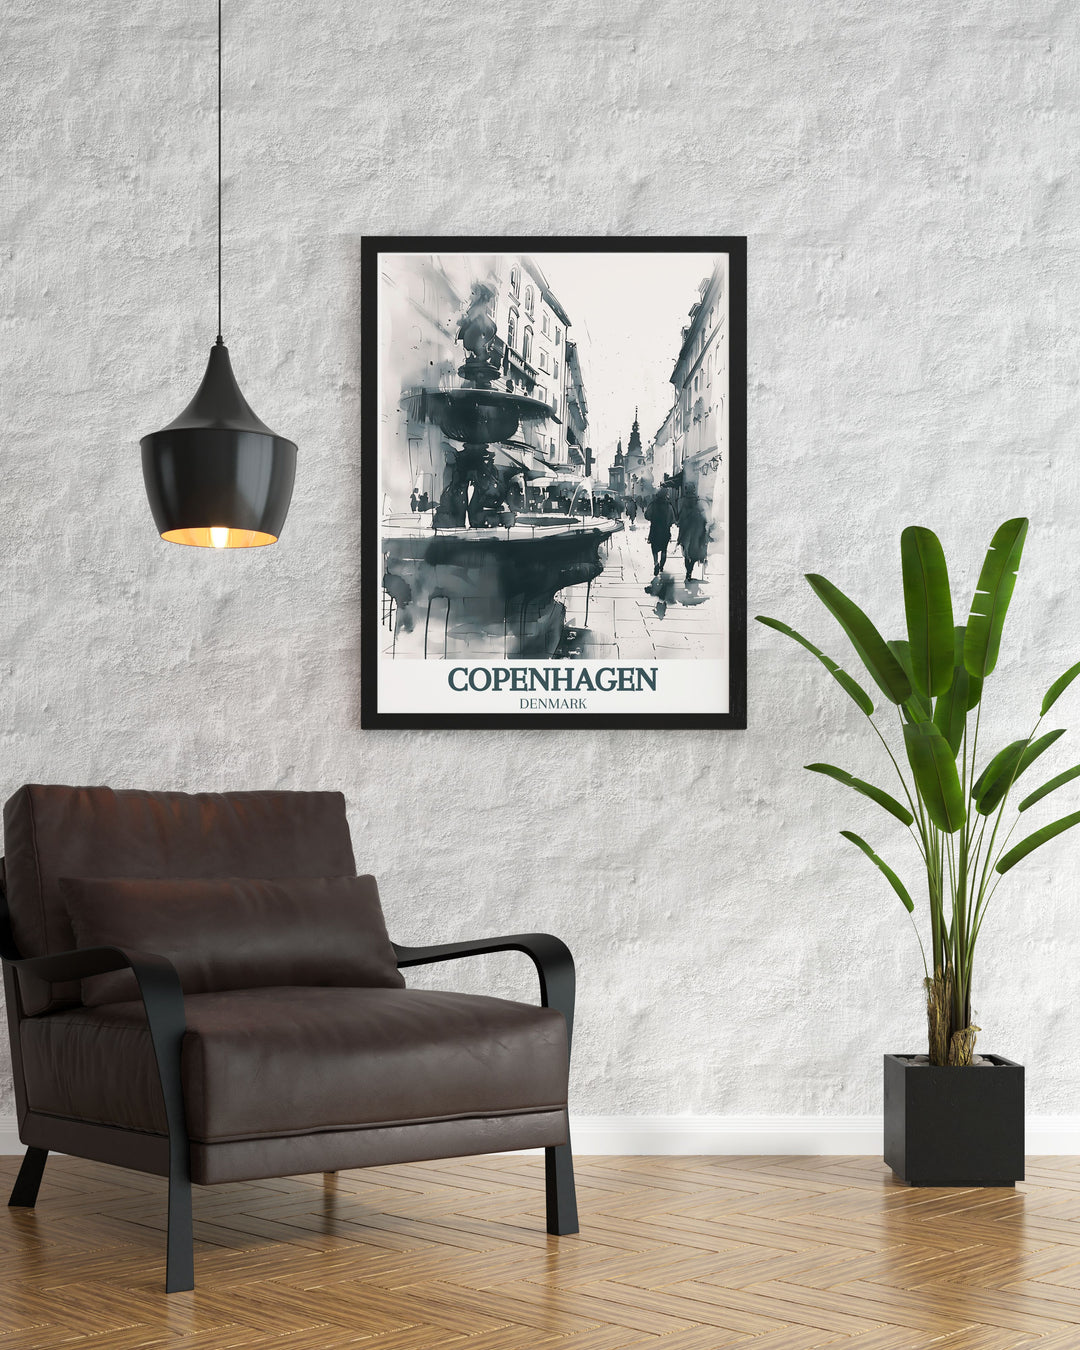 Add a touch of European sophistication to your home with this captivating Copenhagen wall art of Stroget street, Stork Fountain. The detailed print brings the lively streets and iconic landmarks of Denmark into your space. A must have for art and travel enthusiasts.